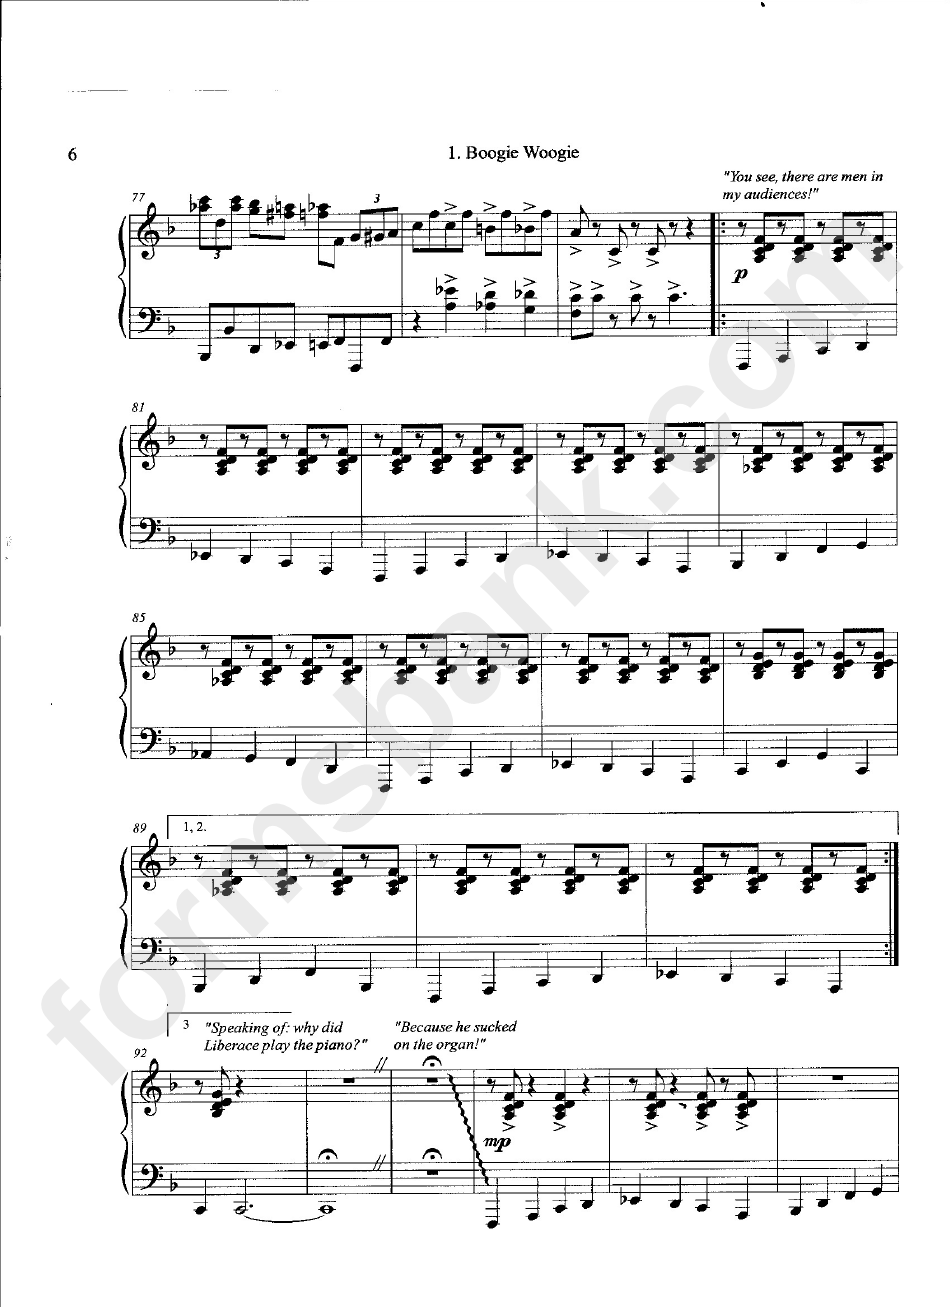 boogie woogie piano sheet music Boogie-woogie piano sheet music by todd ...